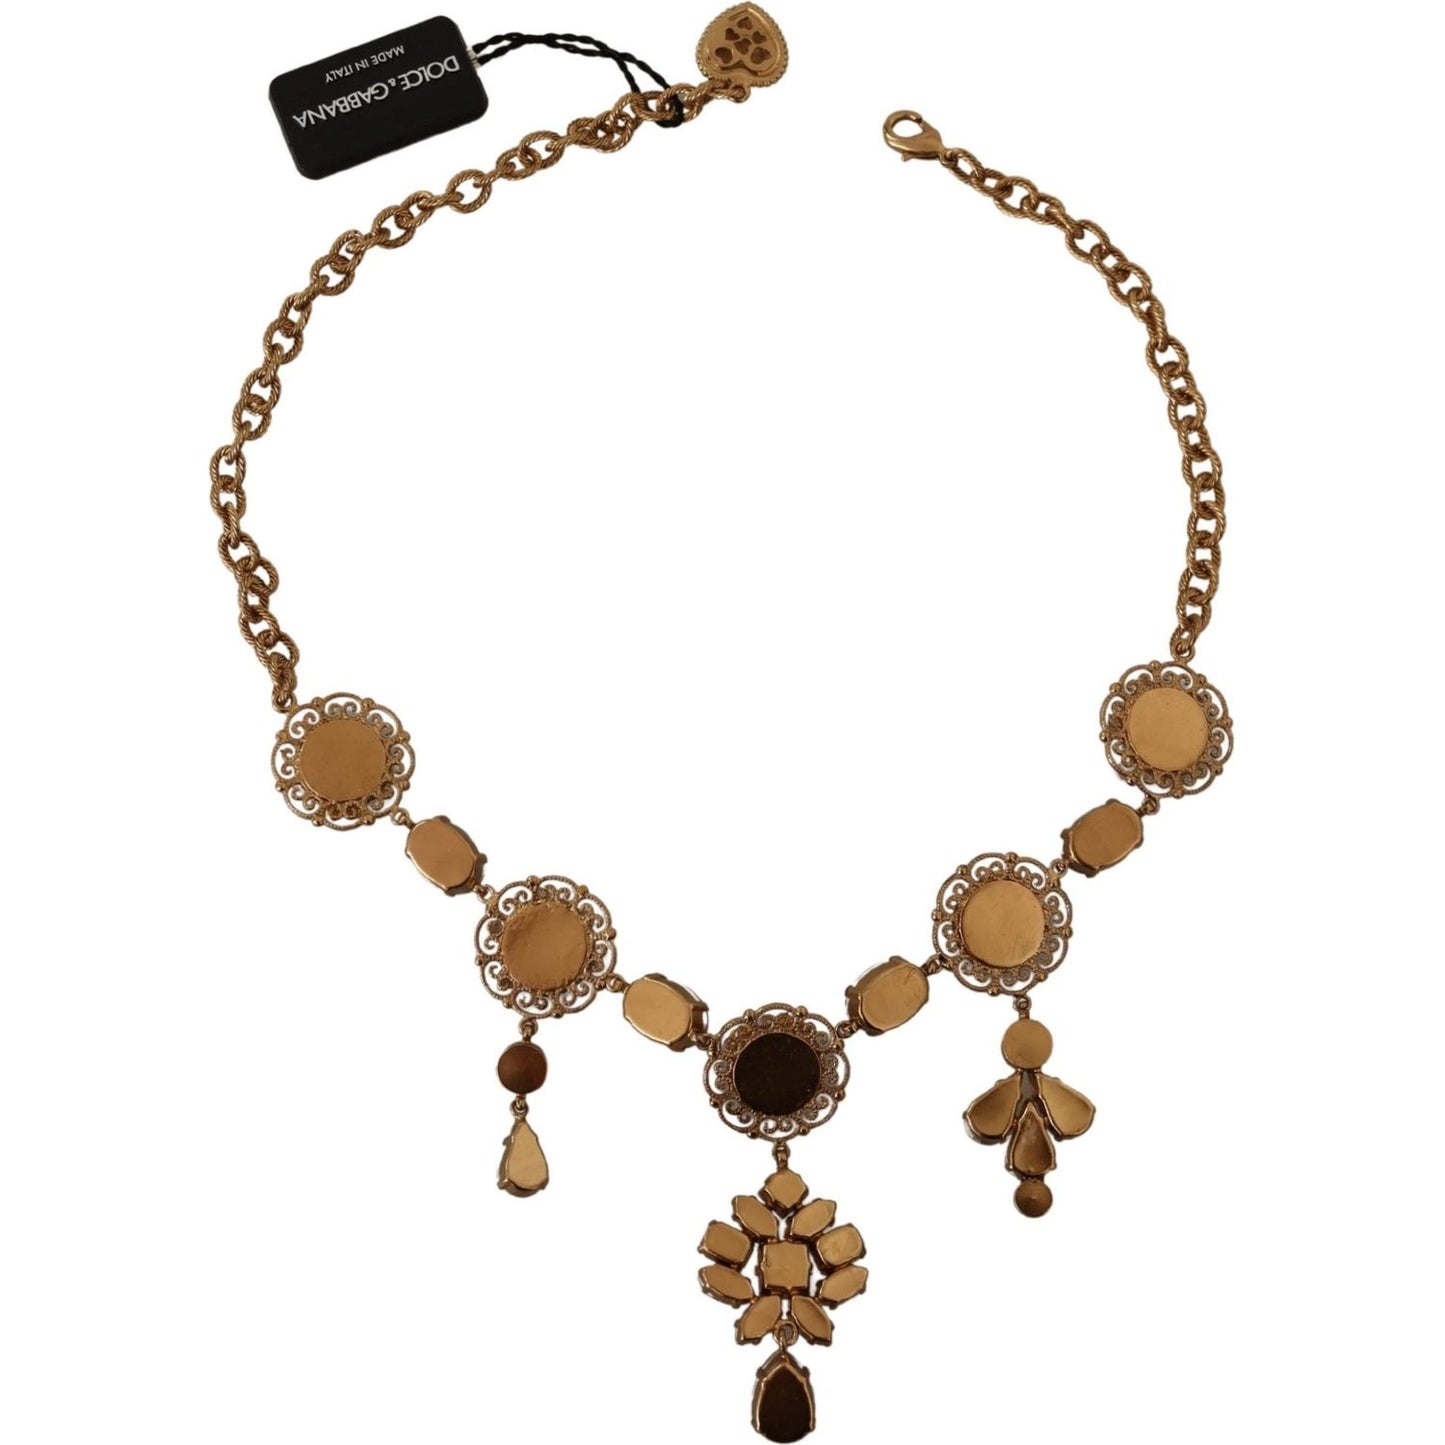 Dolce & Gabbana Elegant Floral Statement Necklace gold-brass-floral-sicily-charms-statement-necklace WOMAN NECKLACE IMG_2056-scaled-1864f8fd-e17.jpg